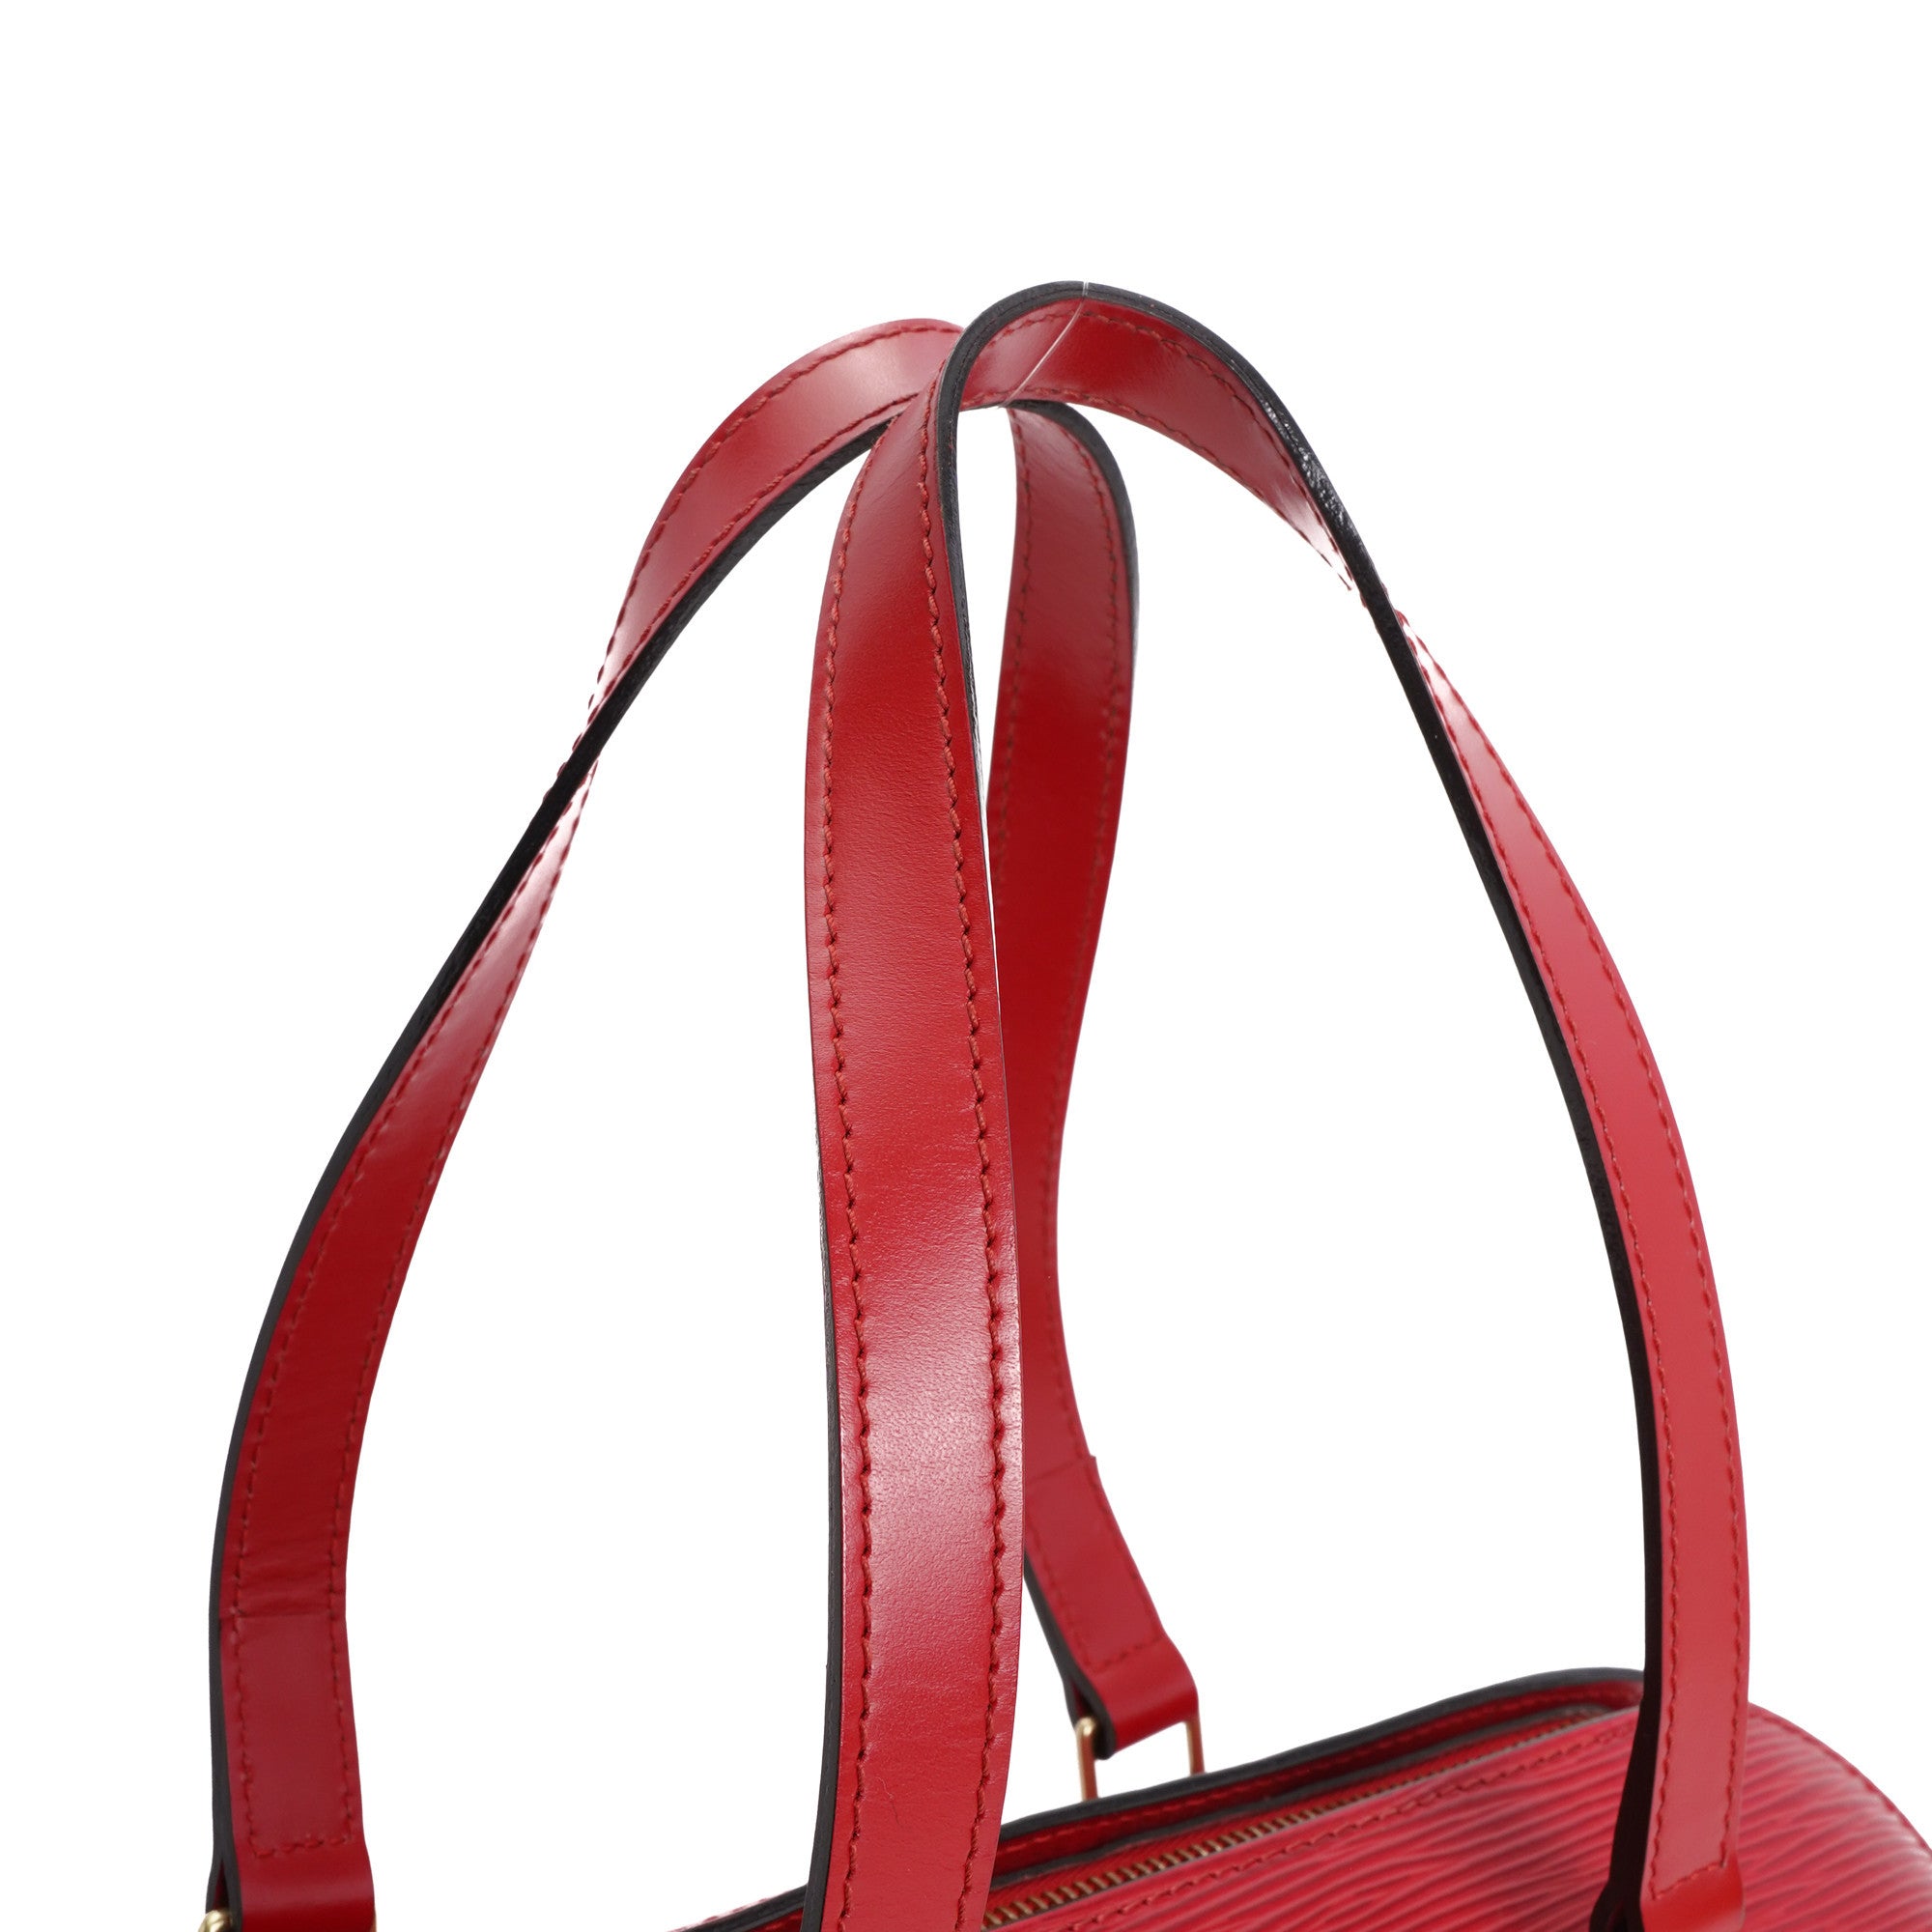 Red Epi Leather Soufflot with Pouch